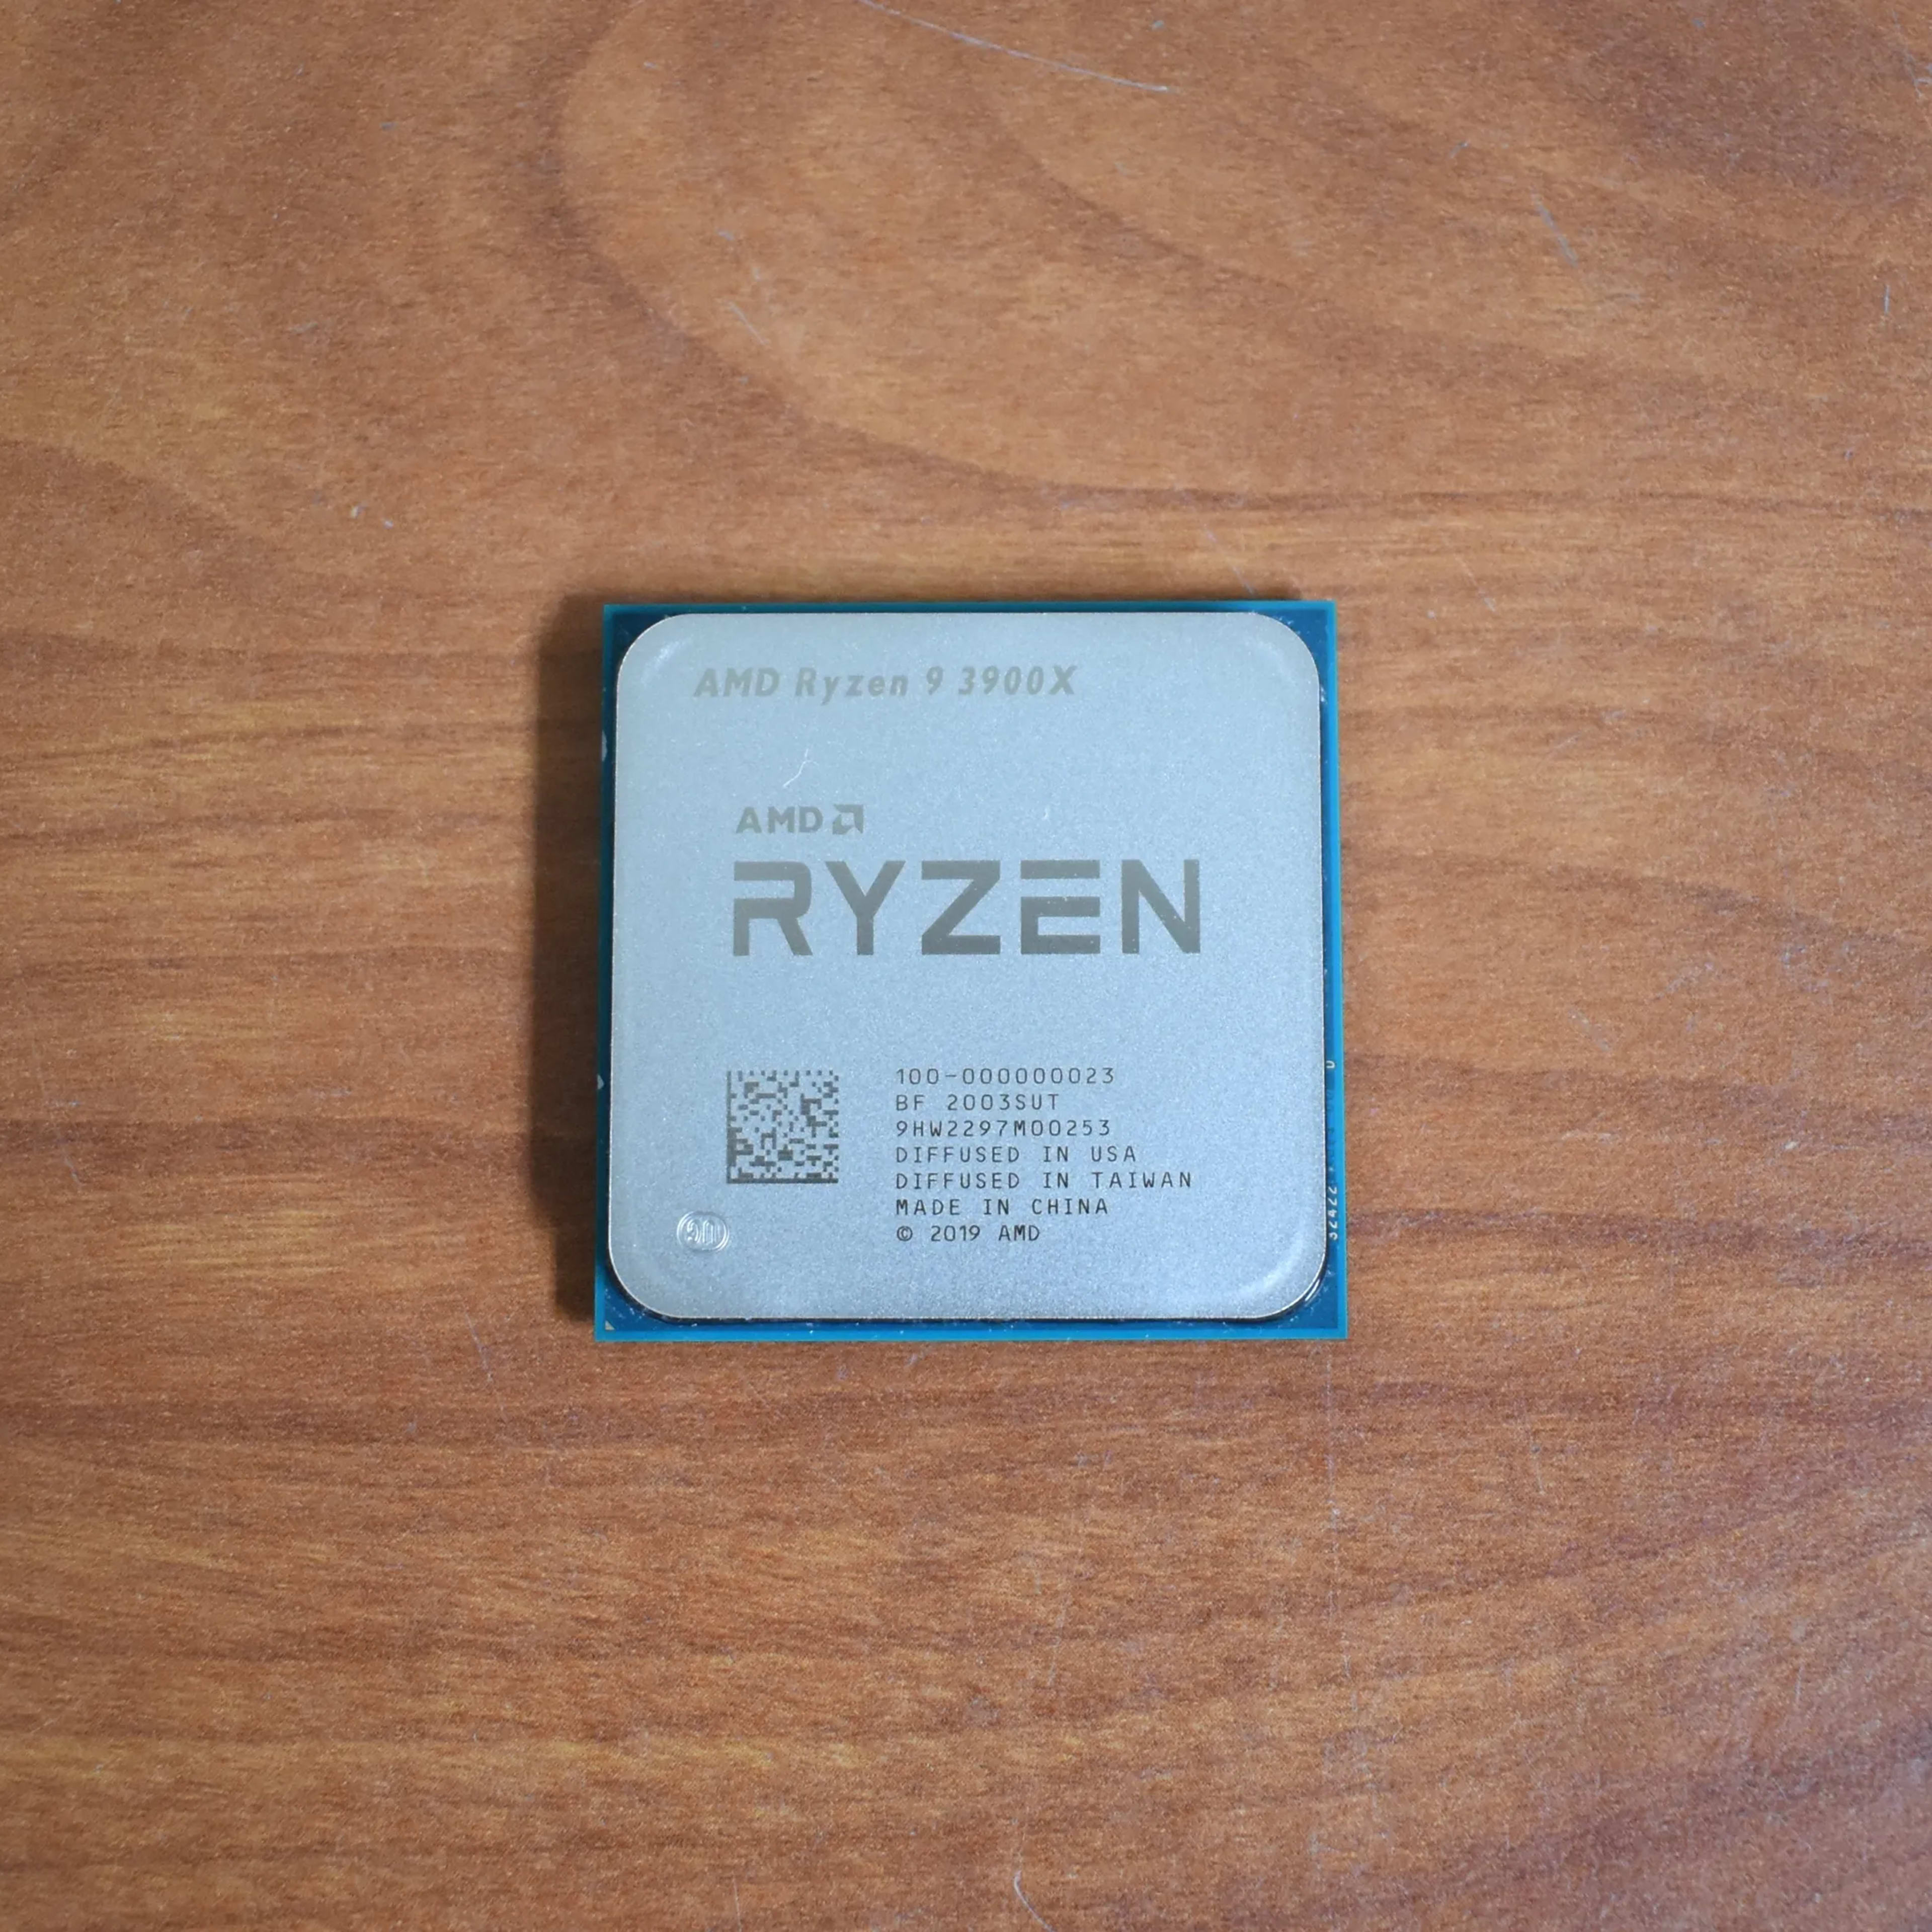 Ryzen 9 3900x - Cleaned and Tested